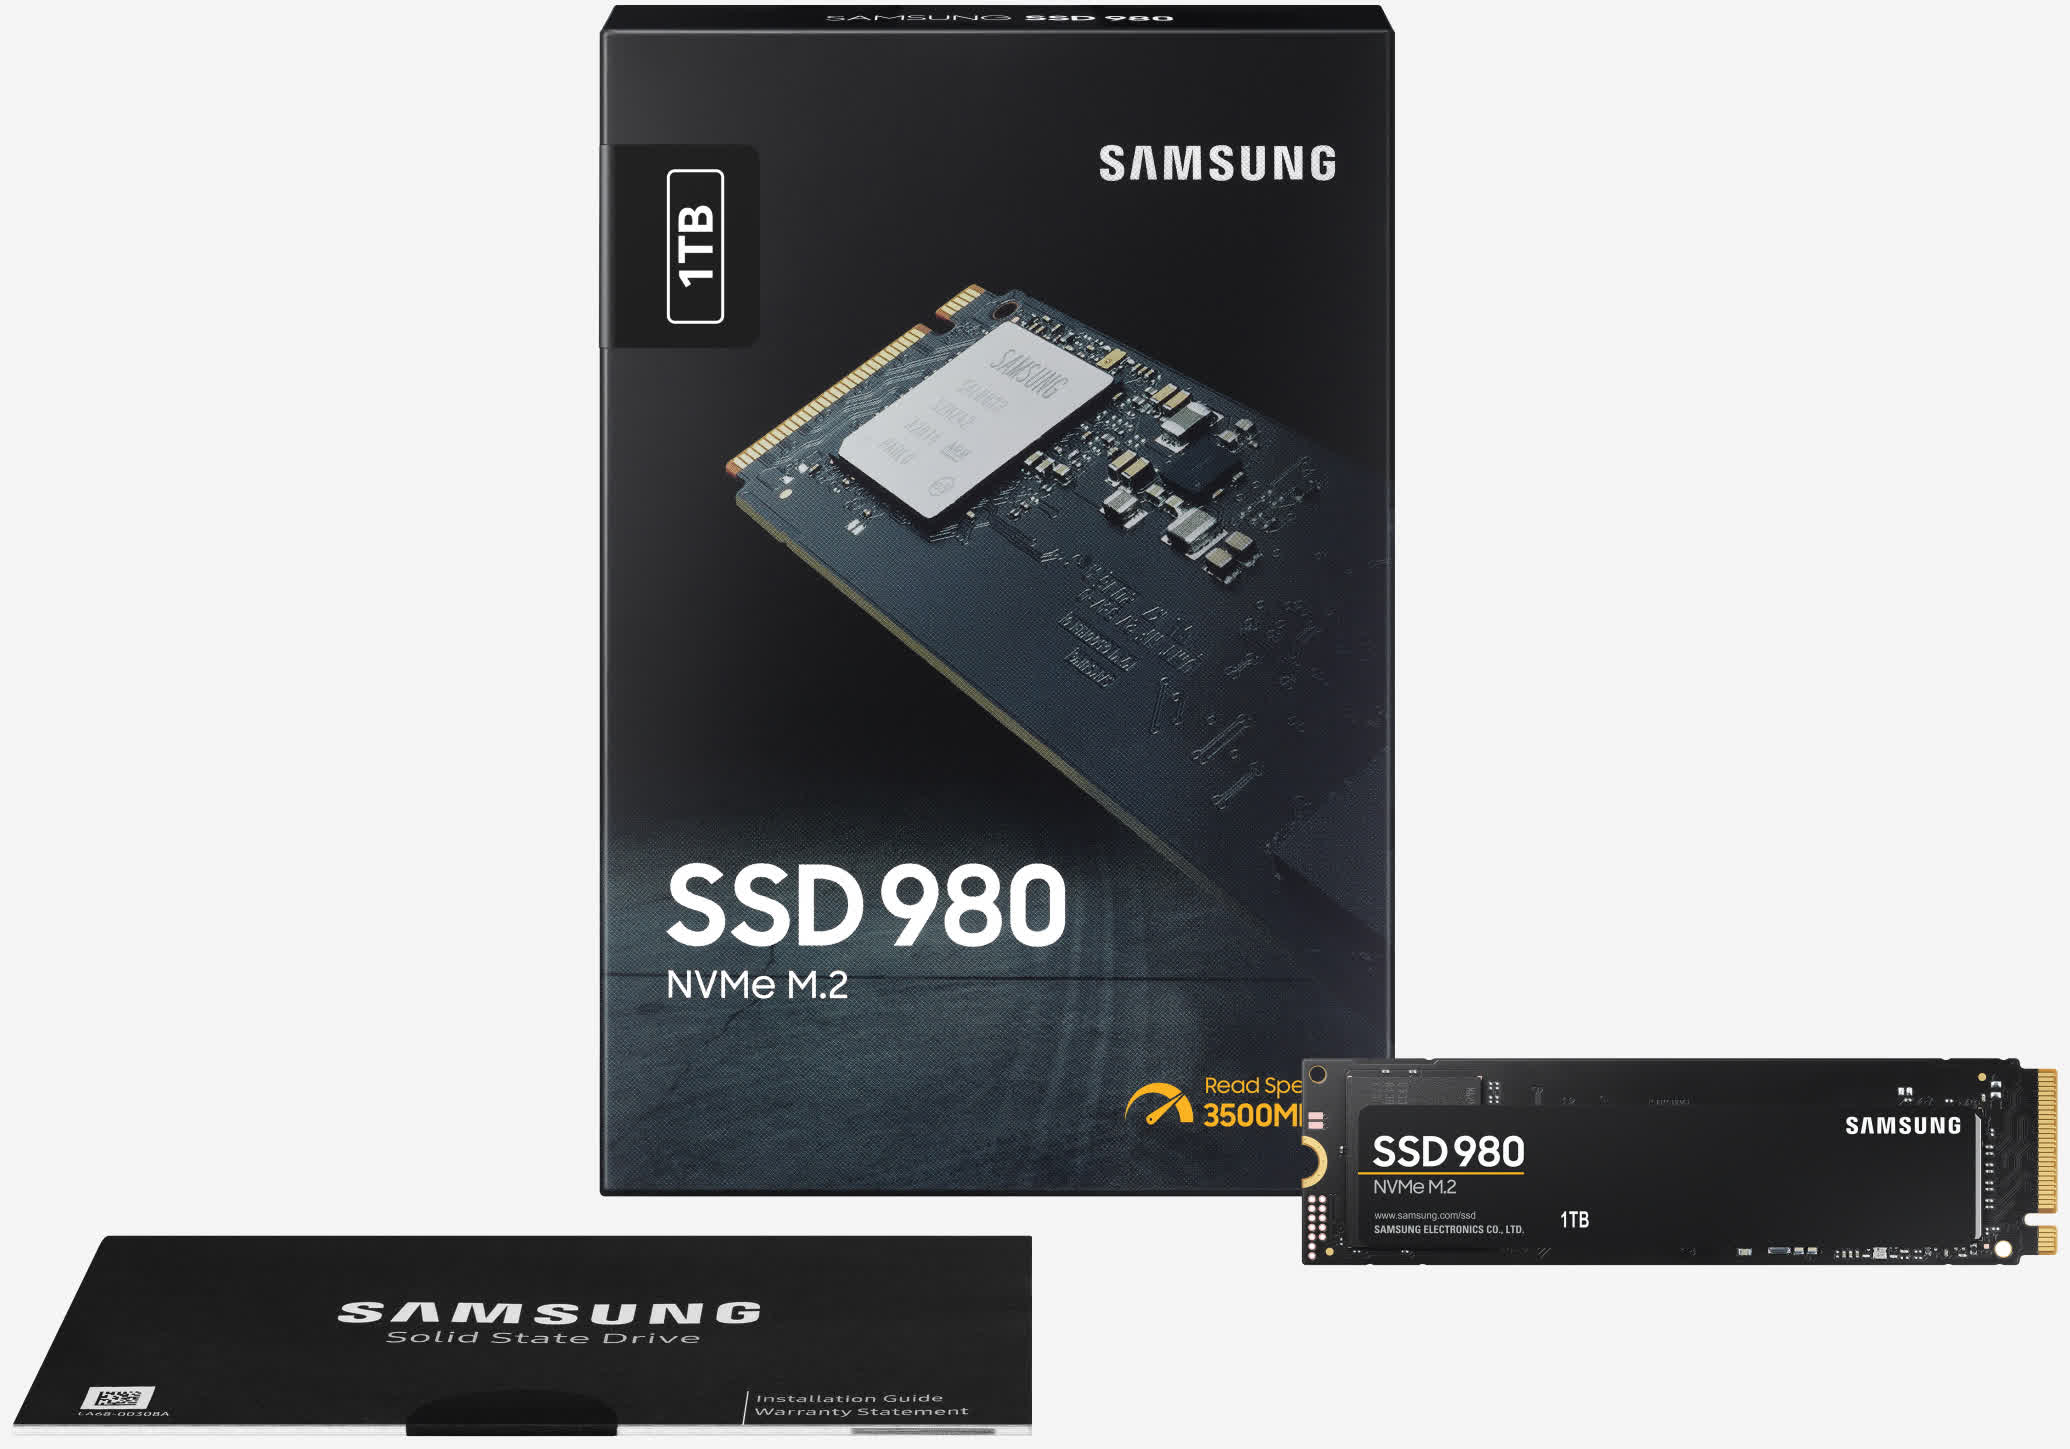 Samsung's first consumer SSD to ship without DRAM is the 980 NVMe